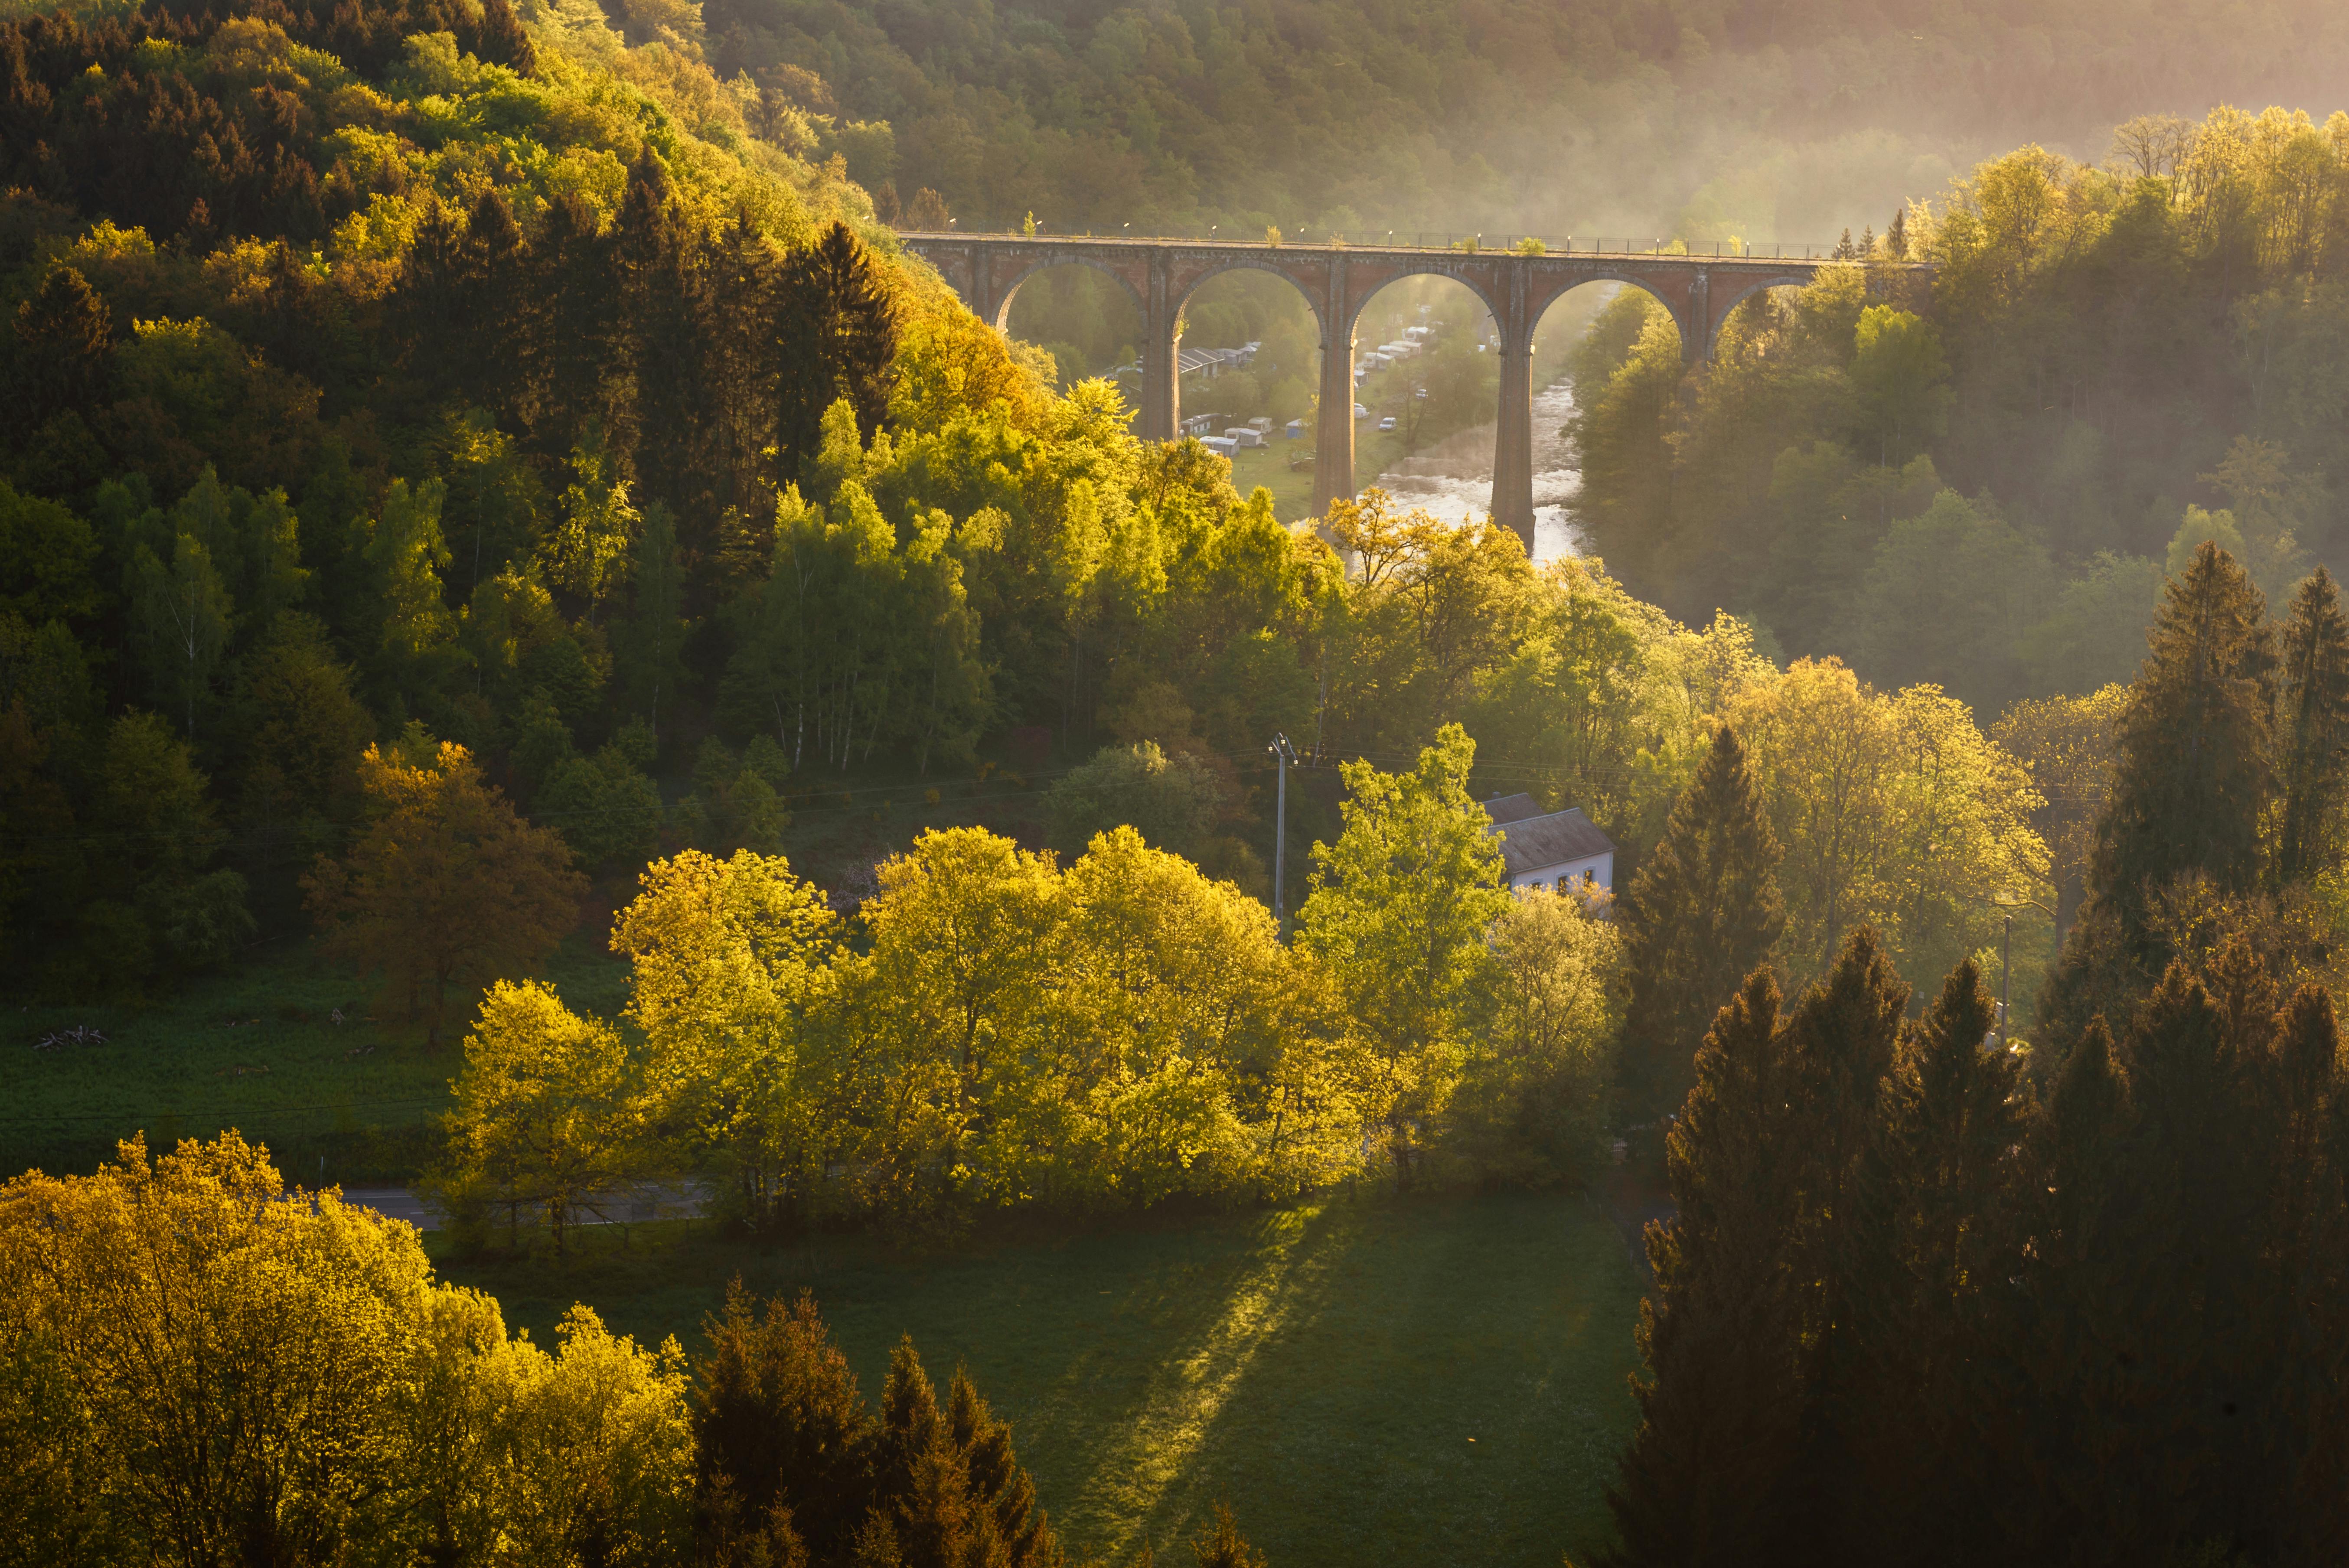 Sunrise in countryside and forest near Herbeumont with wonderful viaduc of Hebeumont Viaduc of Conques across Semois river.